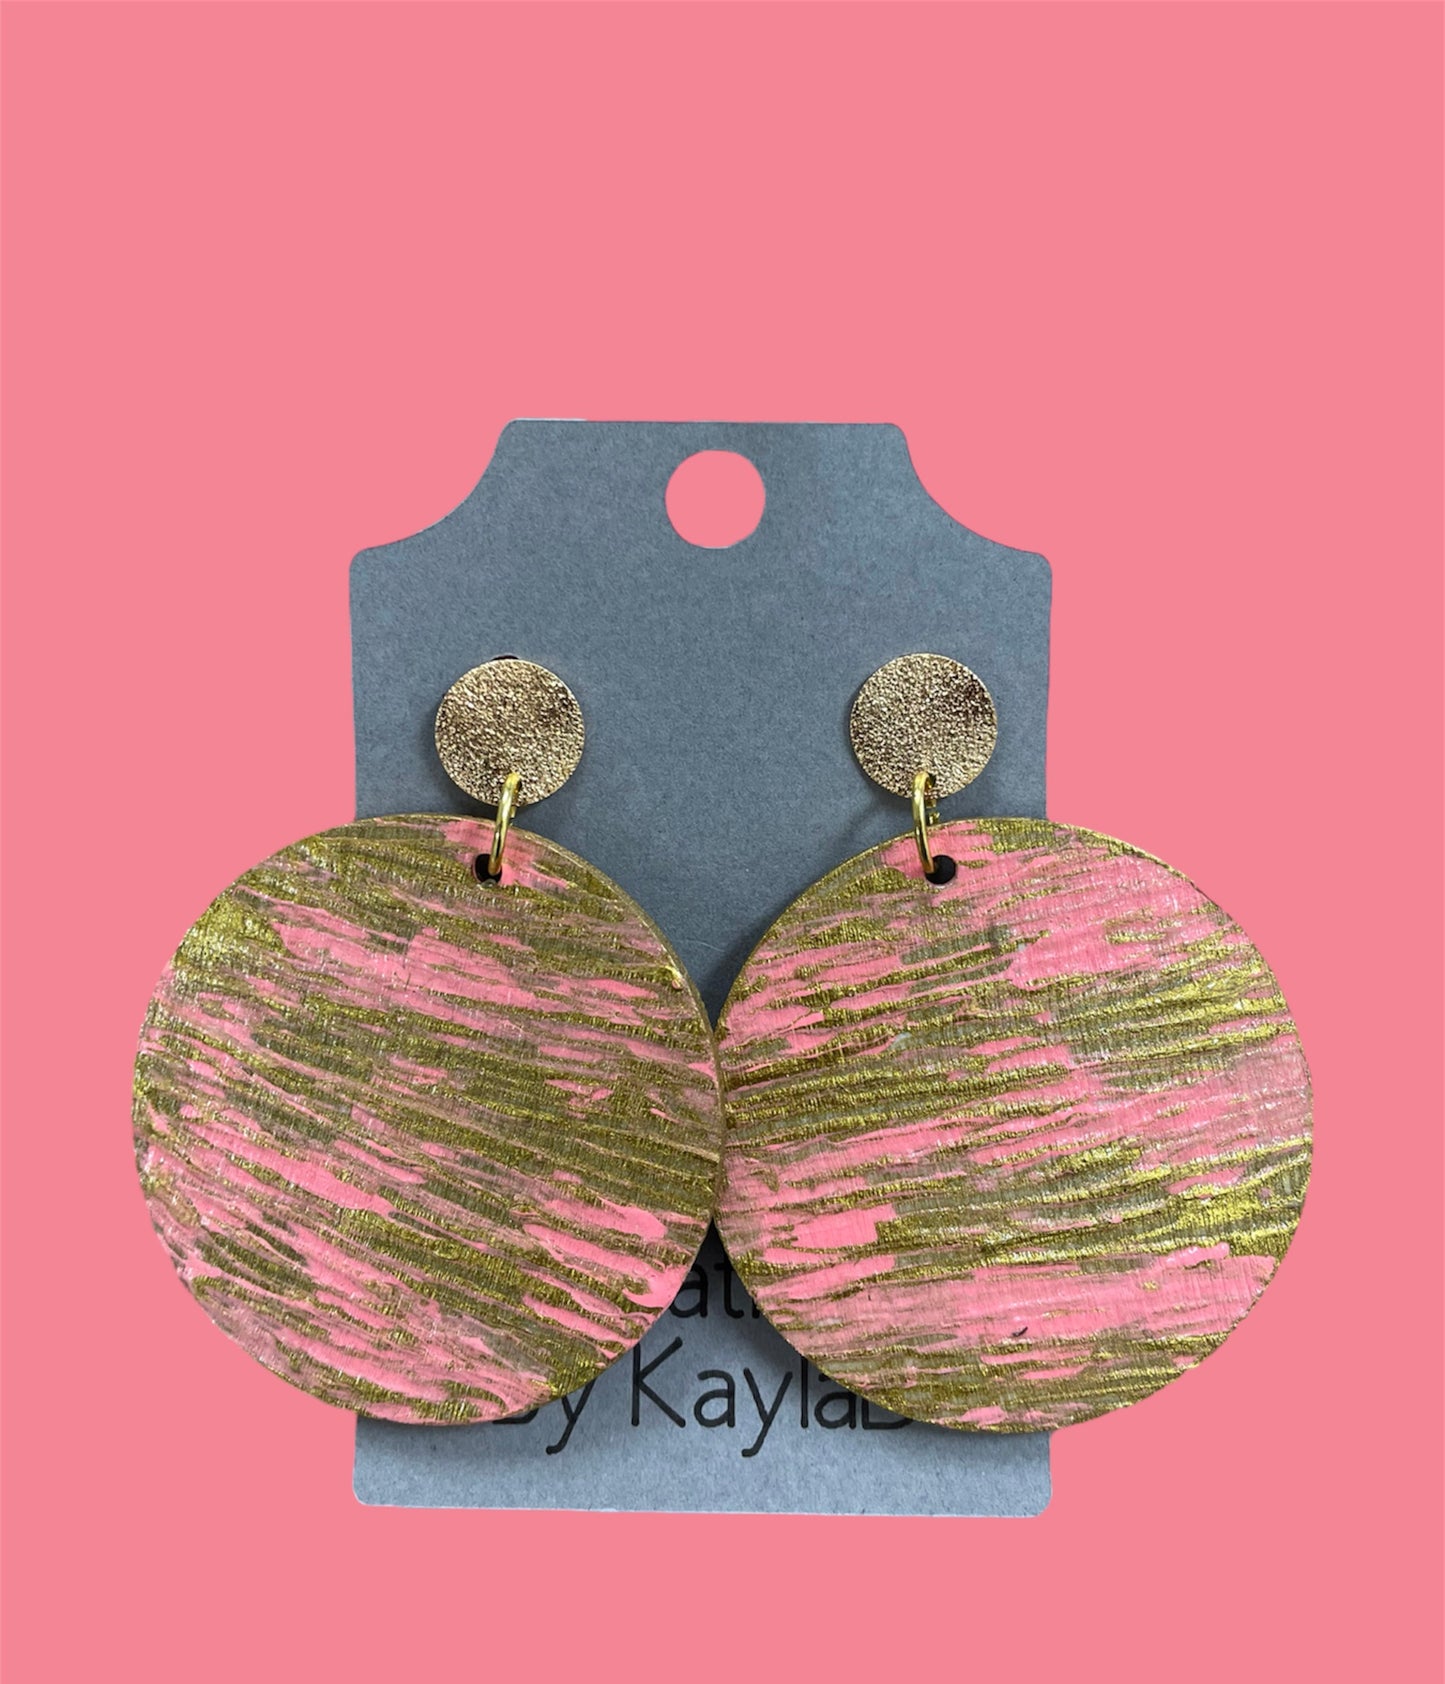 #240 pink and gold painted circle earrings